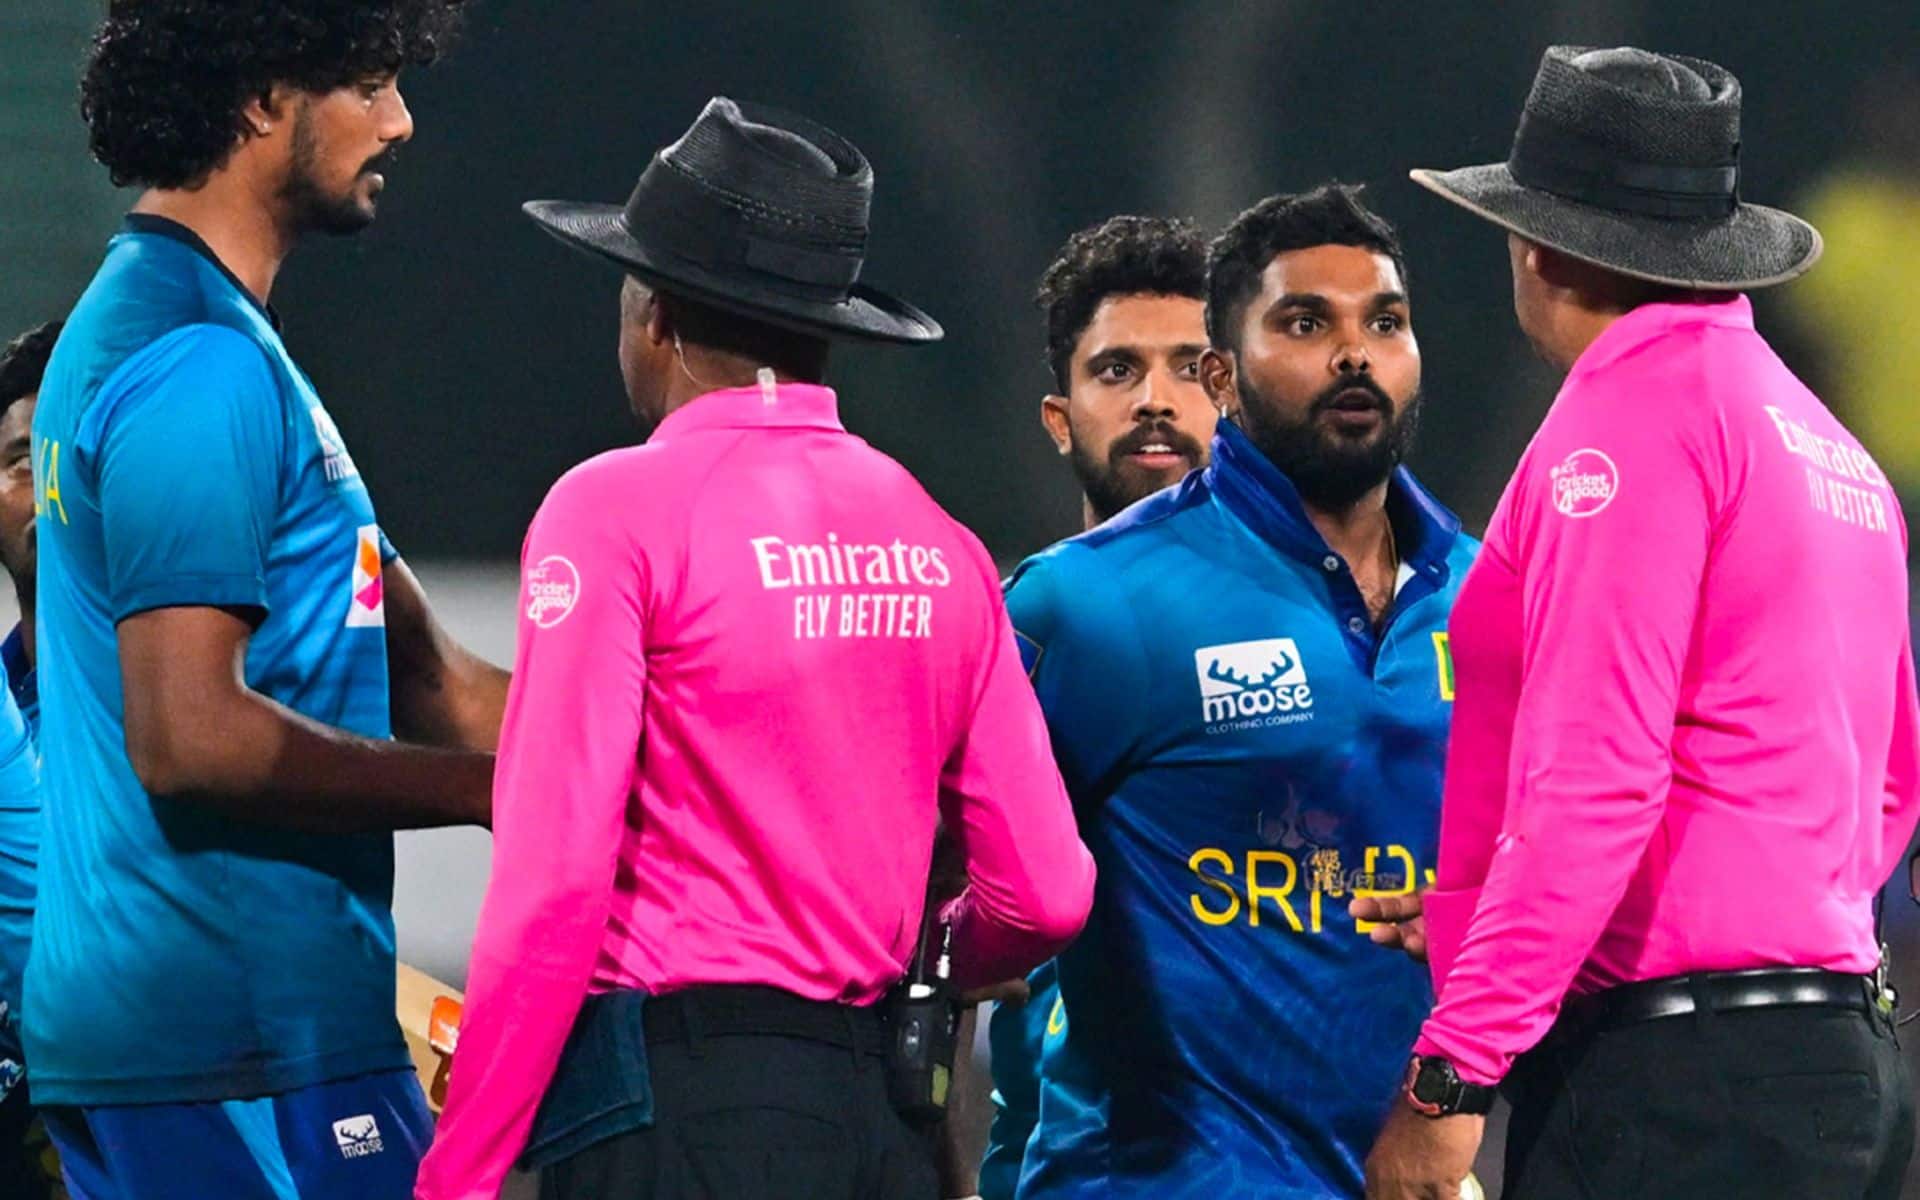 'Much Better If He Did...' - Wanindu Hasaranga Lashes Out At Umpire Over Non-No-Ball Call